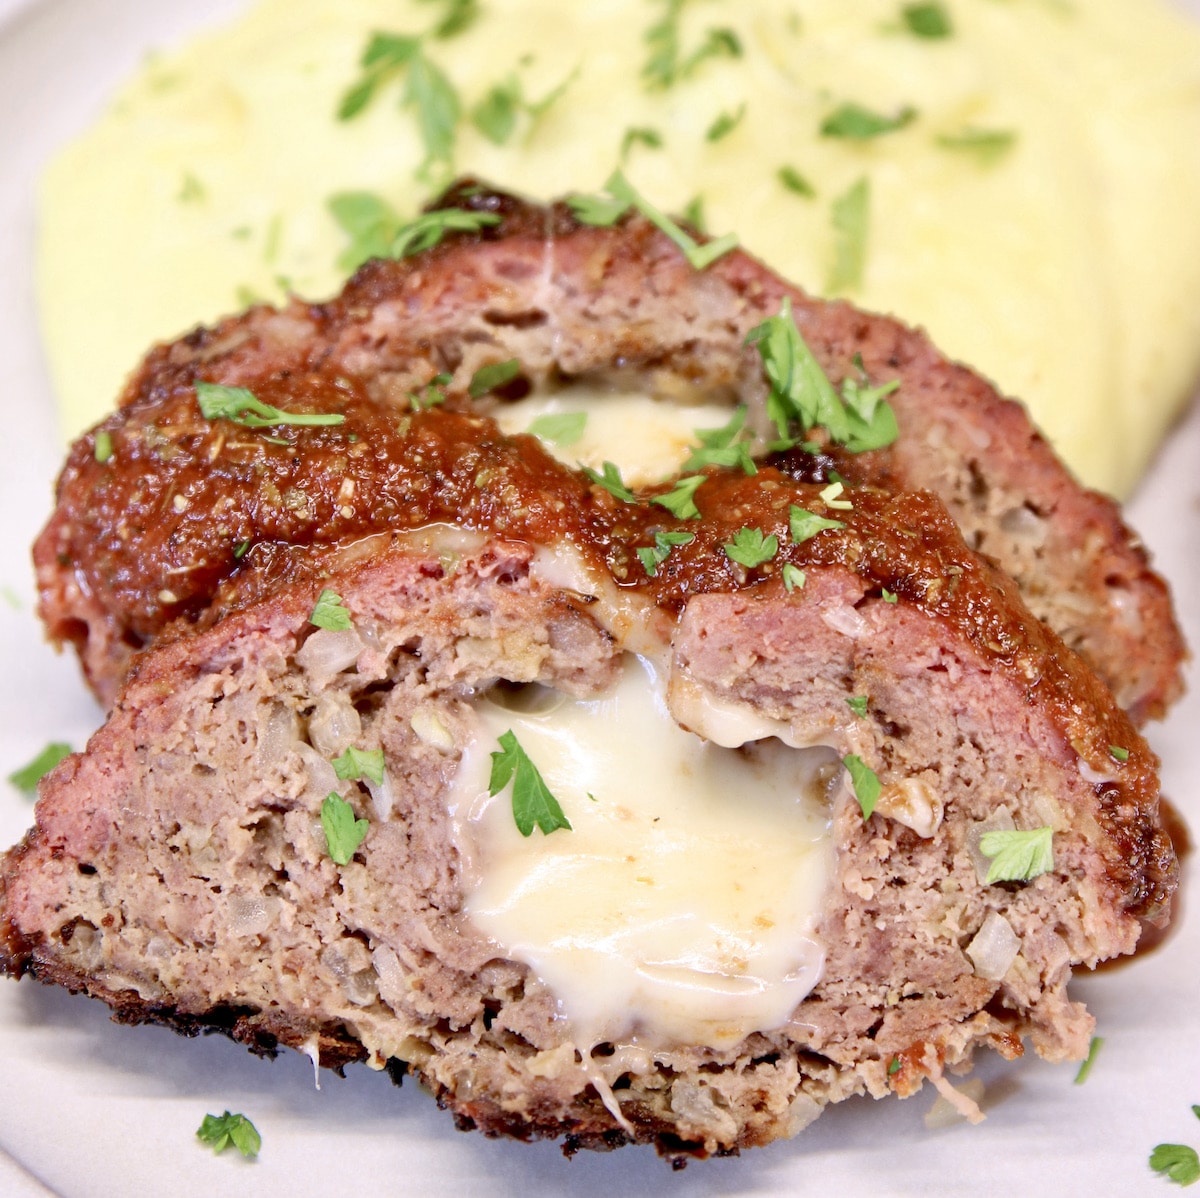 2 slices of mozzarella stuffed meatloaf on a plate with mashed potatoes.